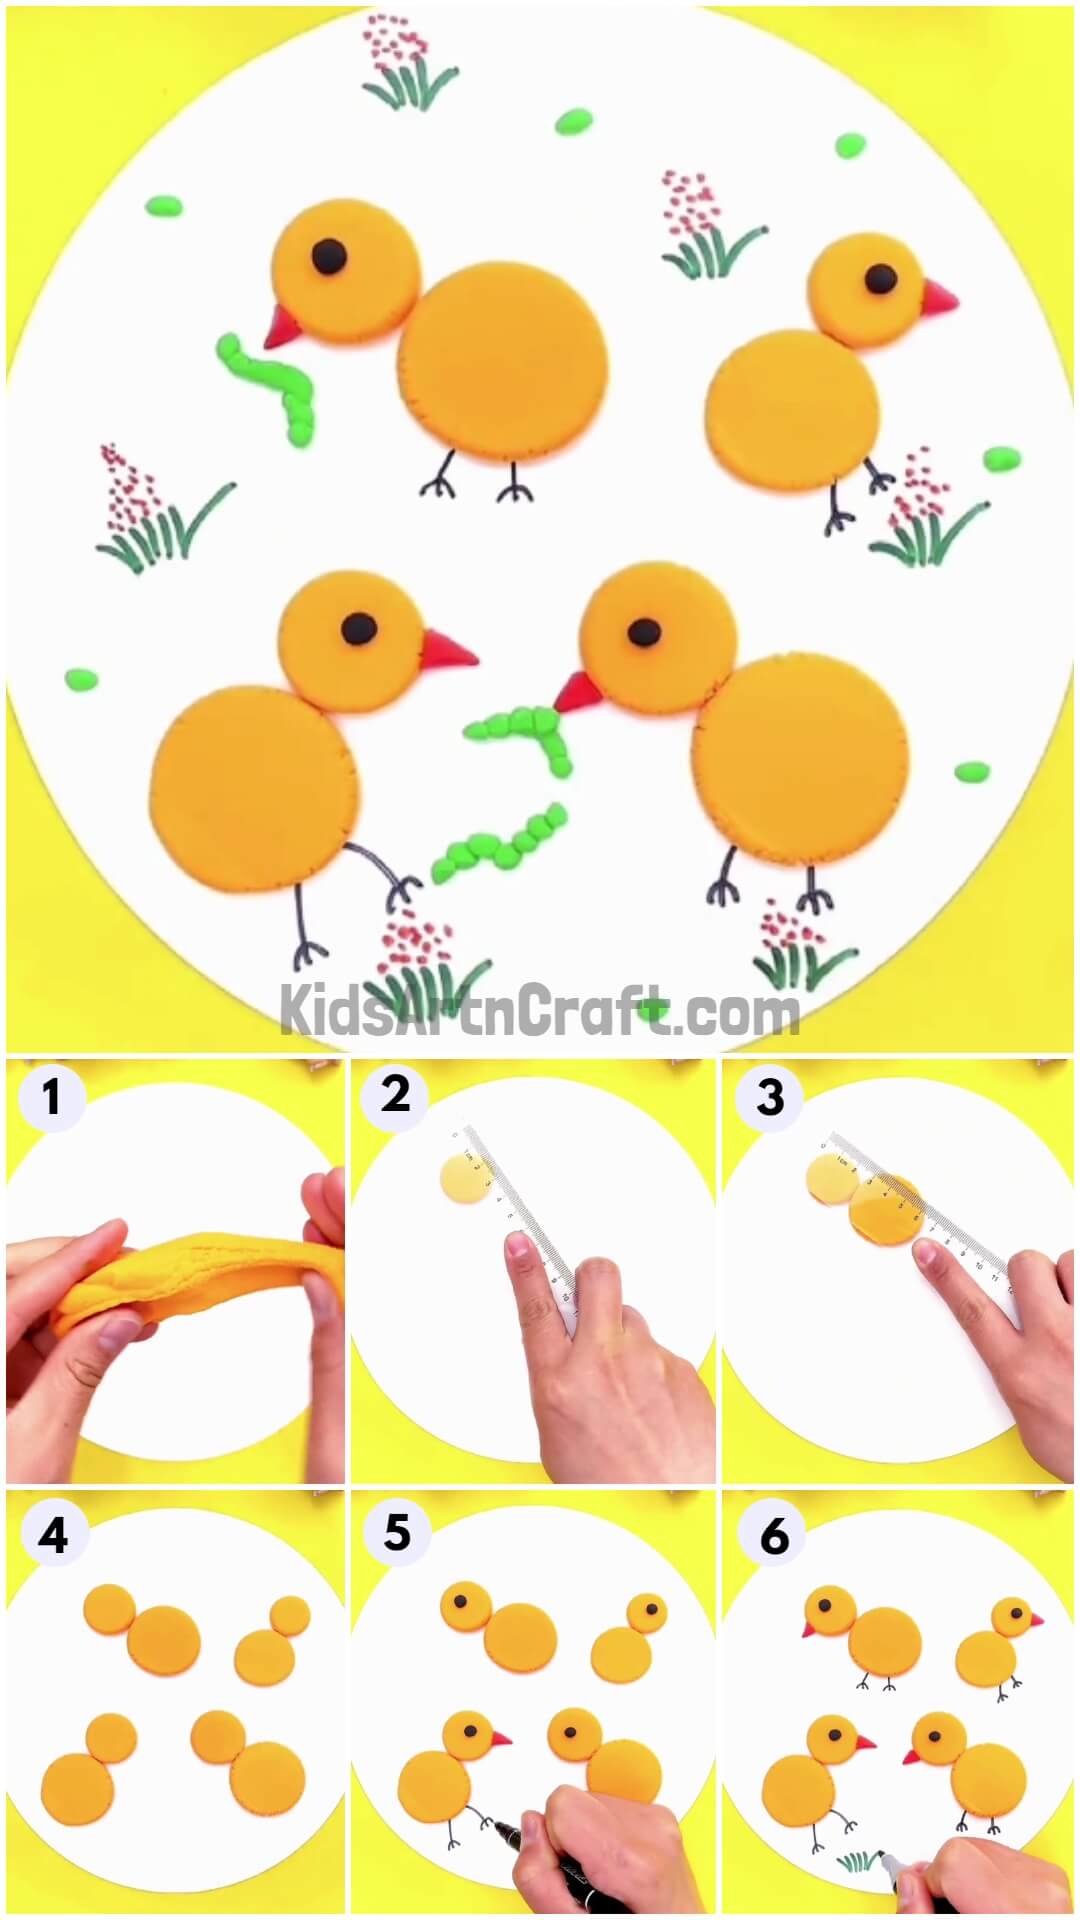 Clay Chicks Craft Step-by-step Tutorial For Beginners